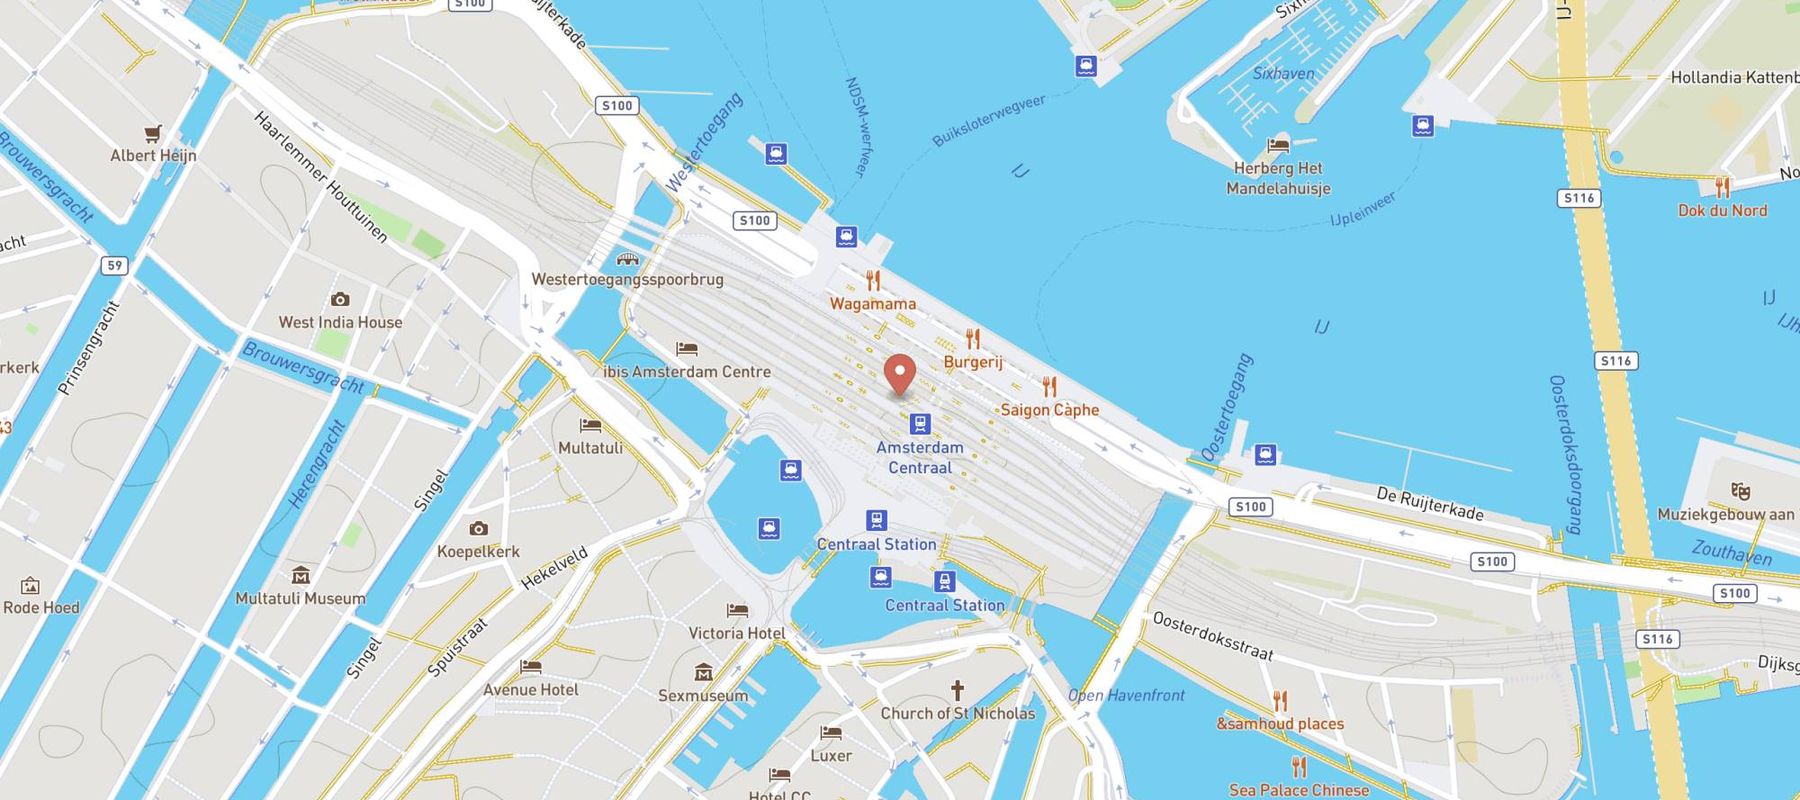 Amsterdam Centraal map